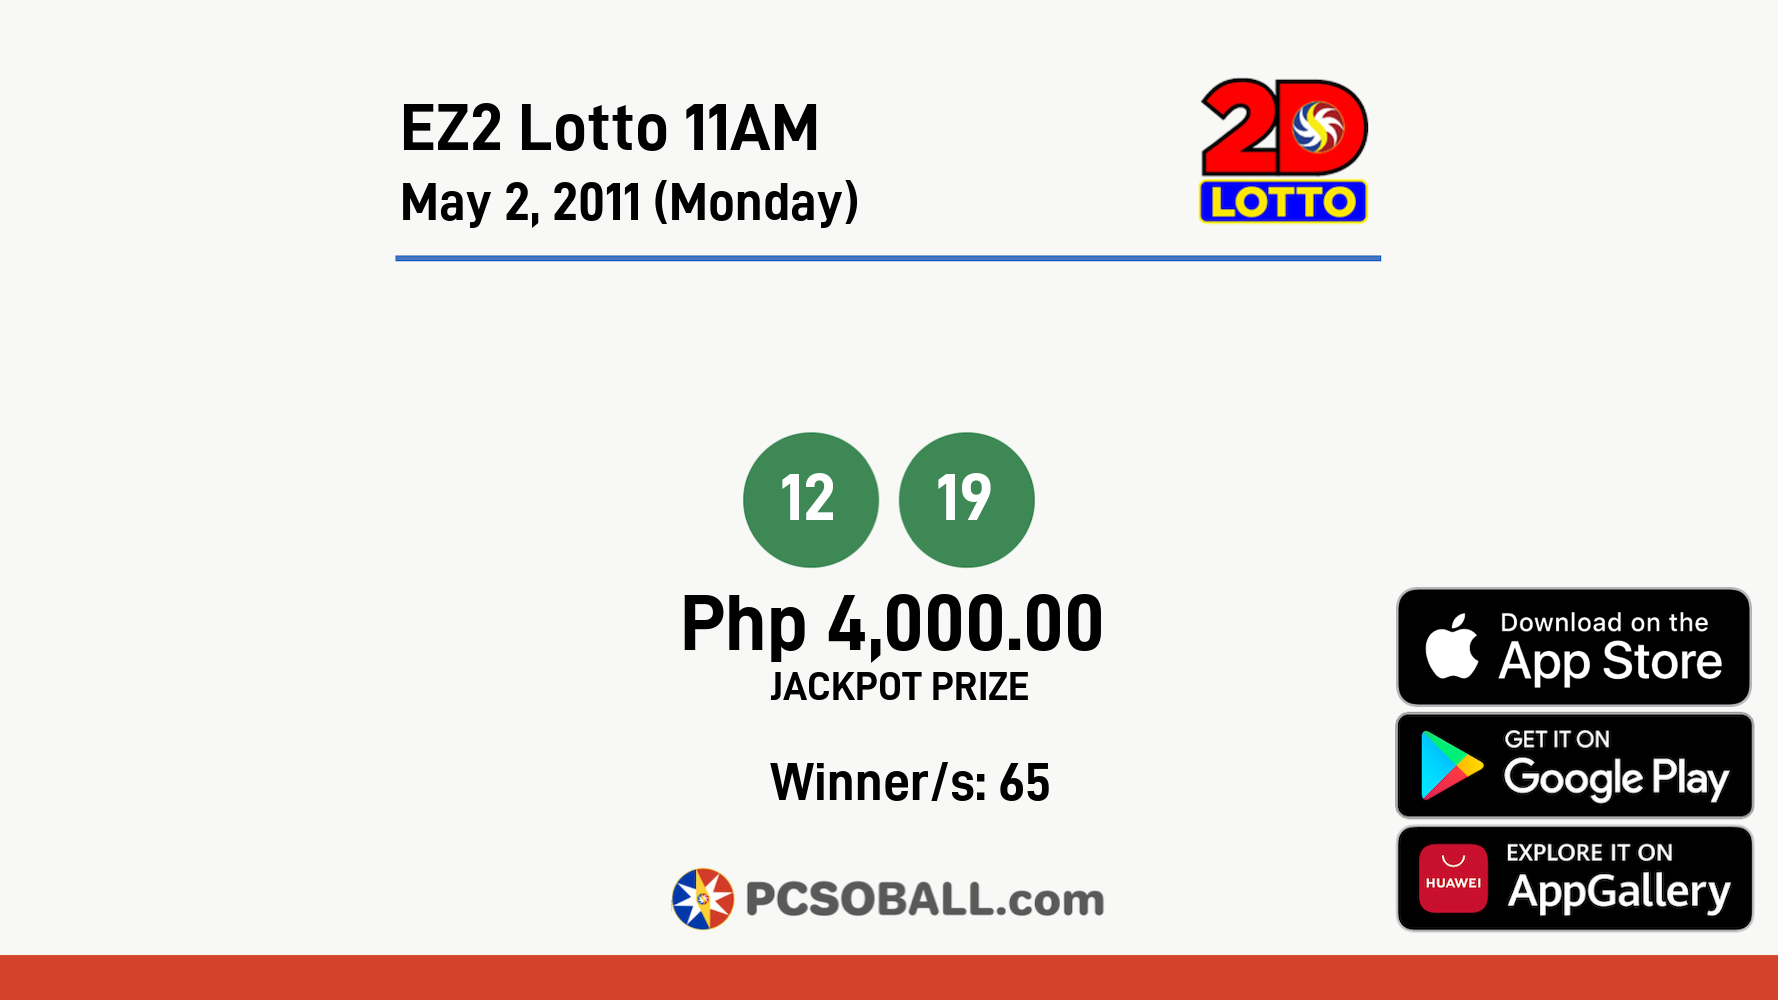 EZ2 Lotto 11AM May 2, 2011 (Monday) Result